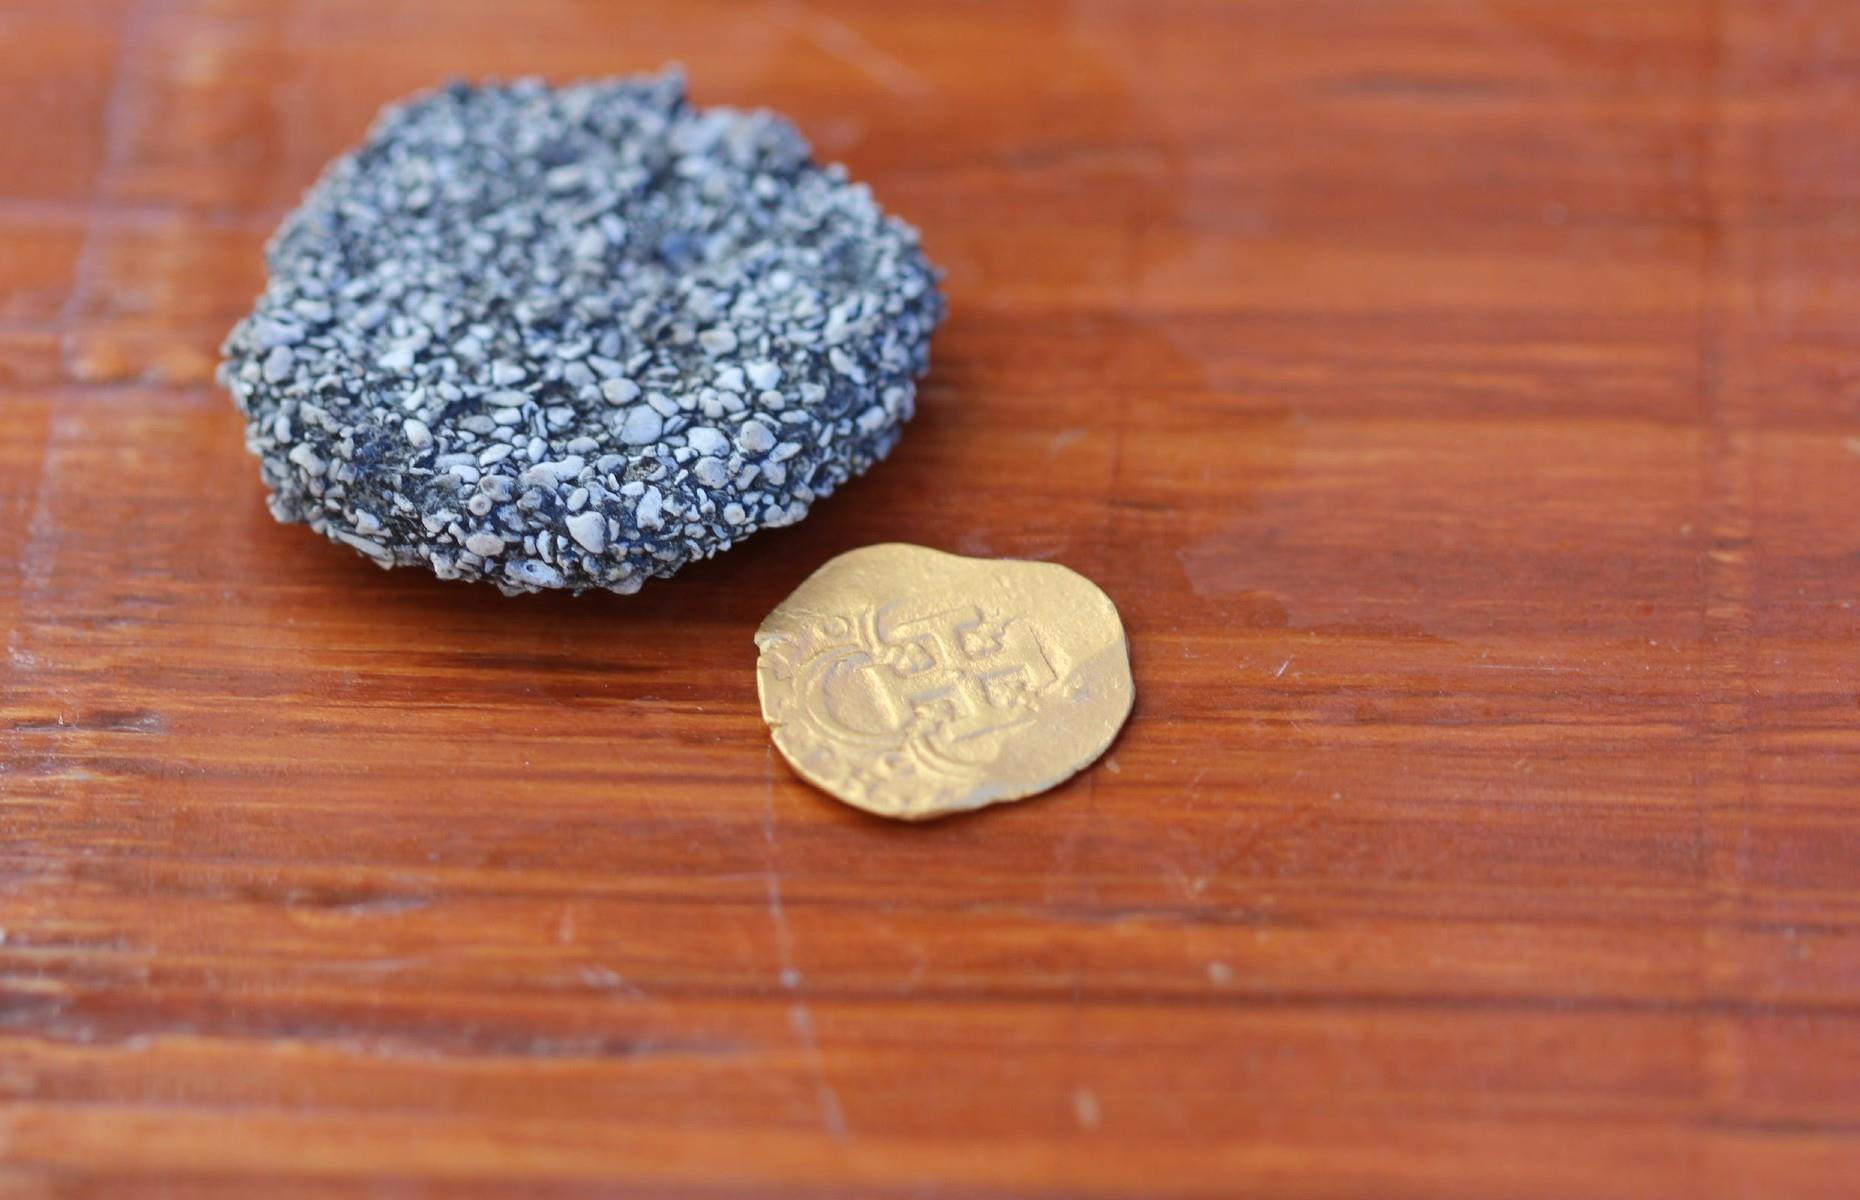 Atocha gold coin discovered in a shipwreck